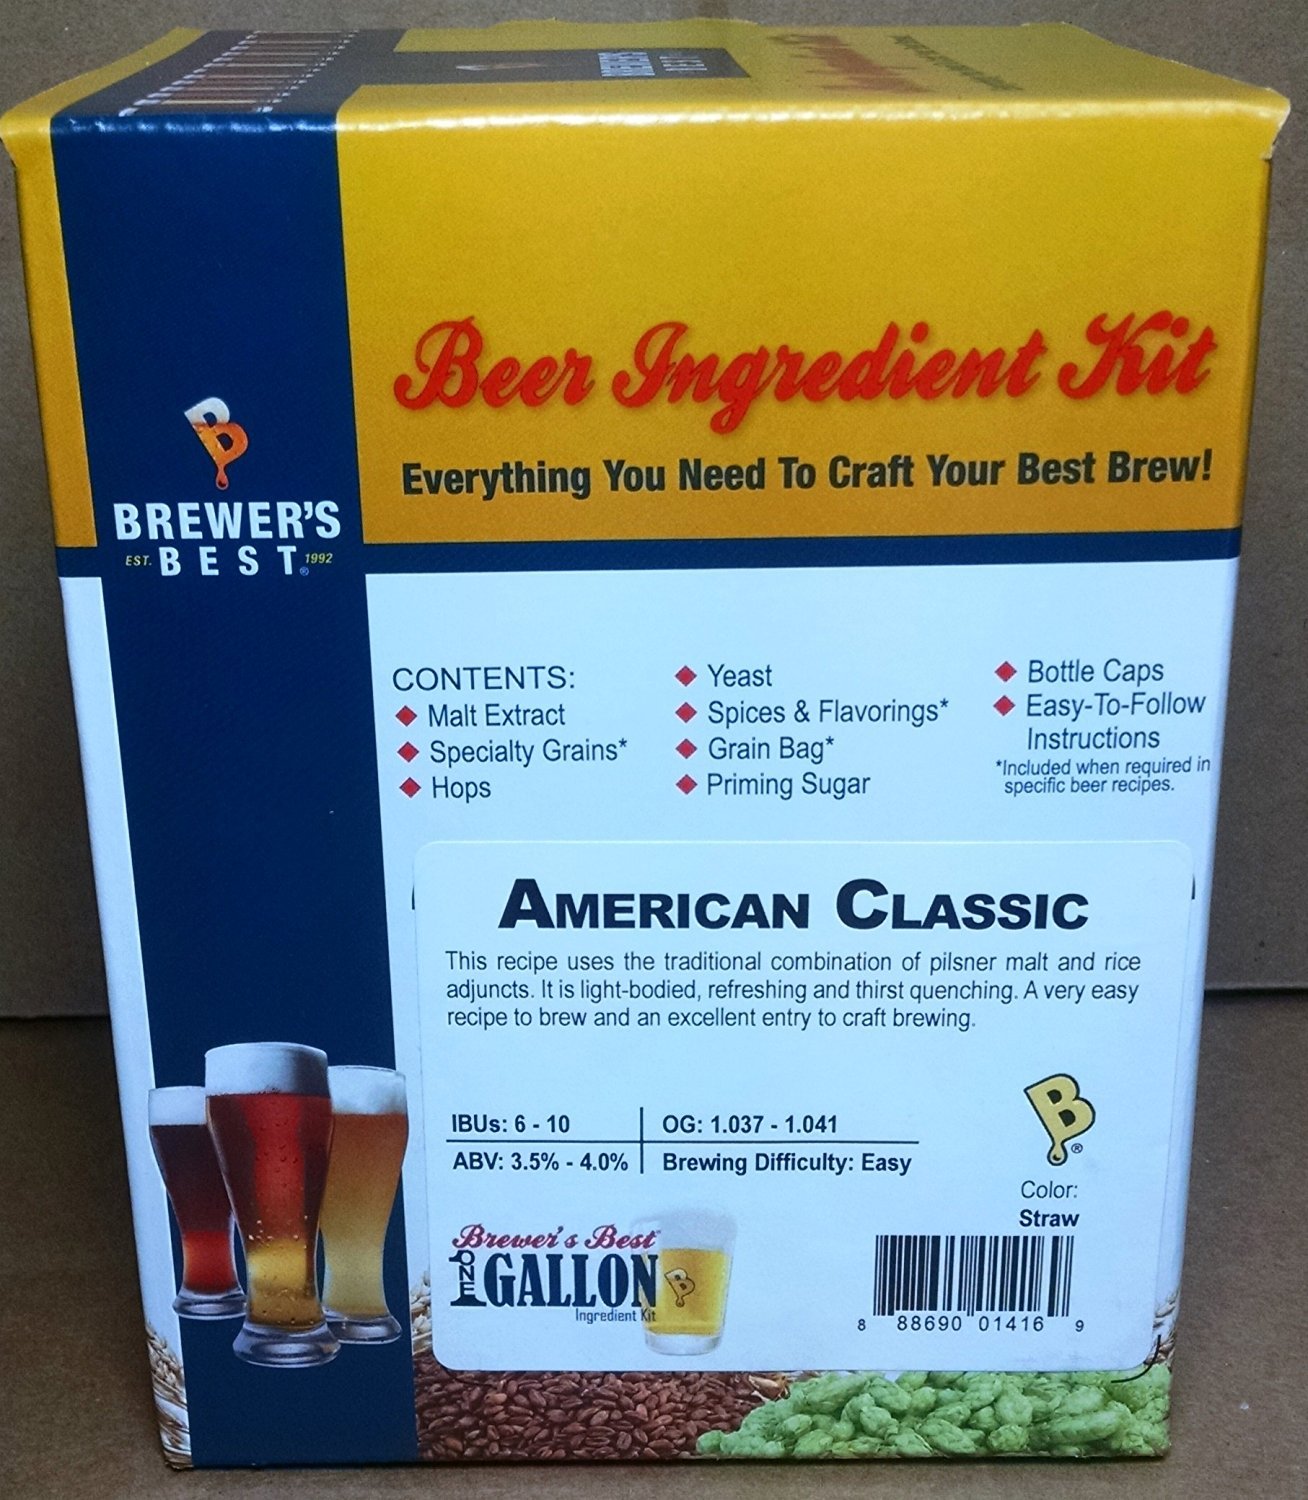 Brewer's Best One Gallon Home Brew Beer Ingredient Kit (American Classic)